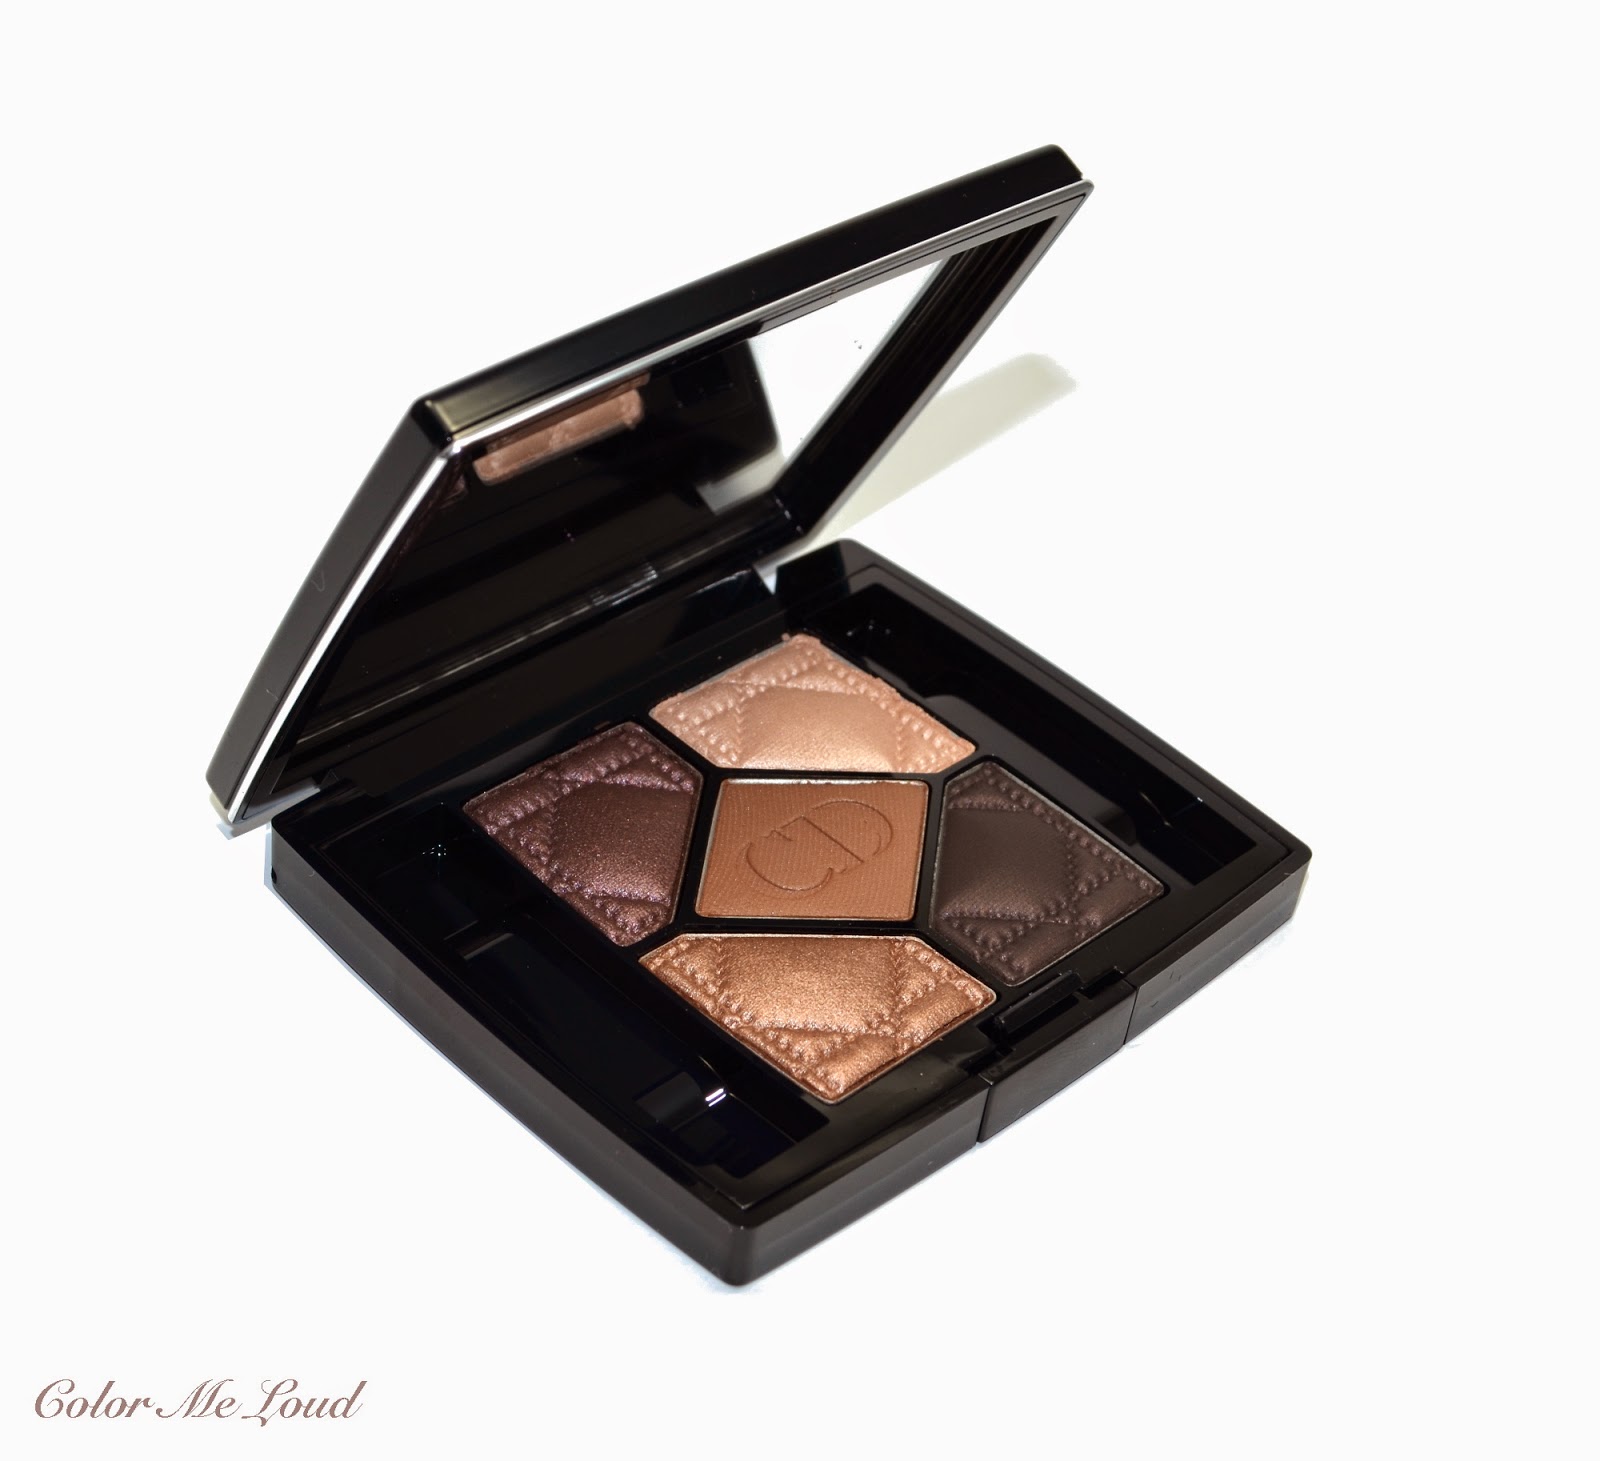 Dior 5 Couleurs Eye Shadow Palette #796 Cuir Cannage, Review